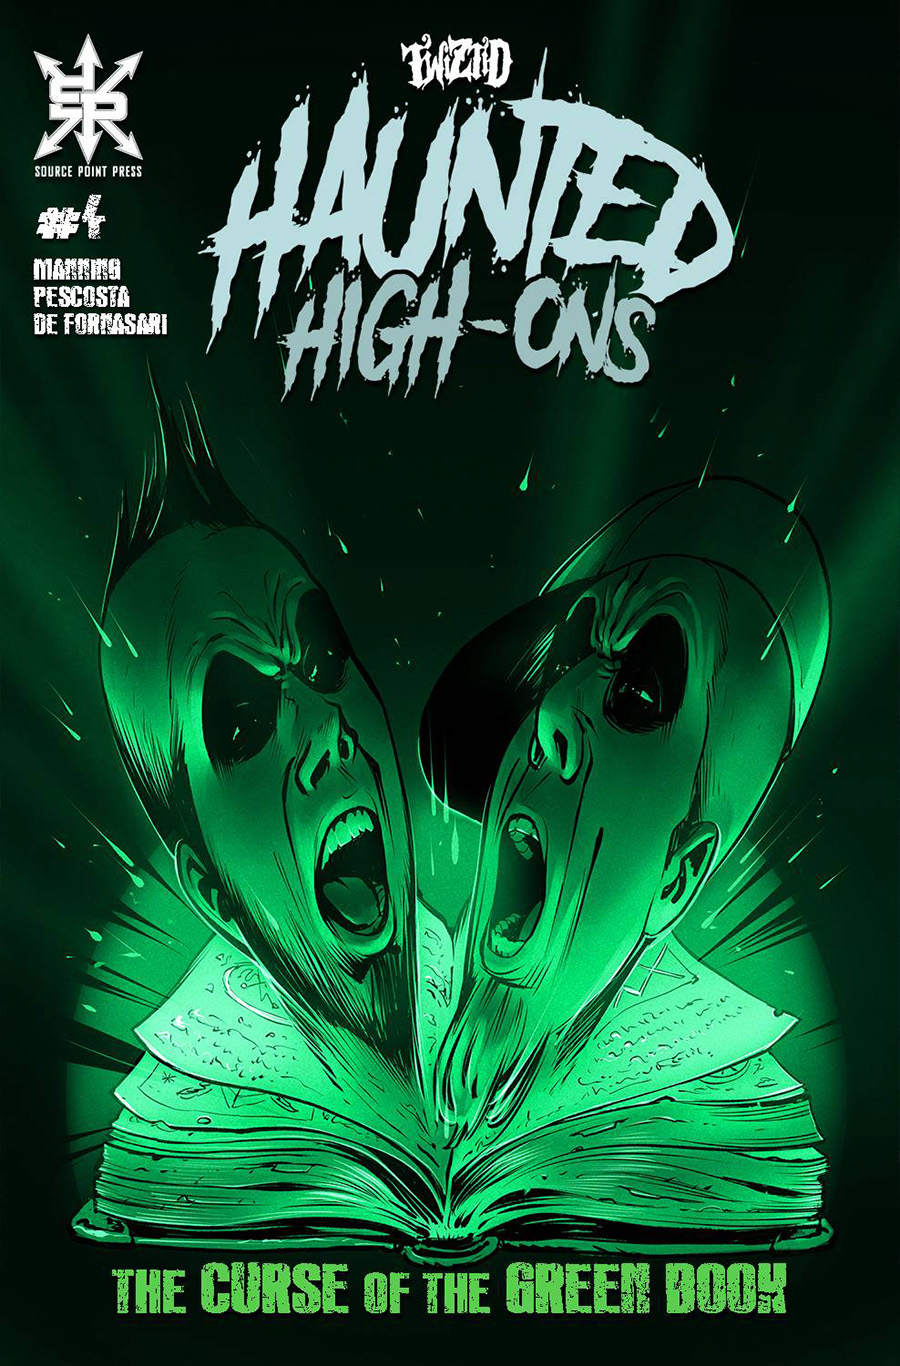 Twiztid Haunted High-Ons The Curse Of The Green Book #4 Cover A Regular Marianna Pescosta Cover